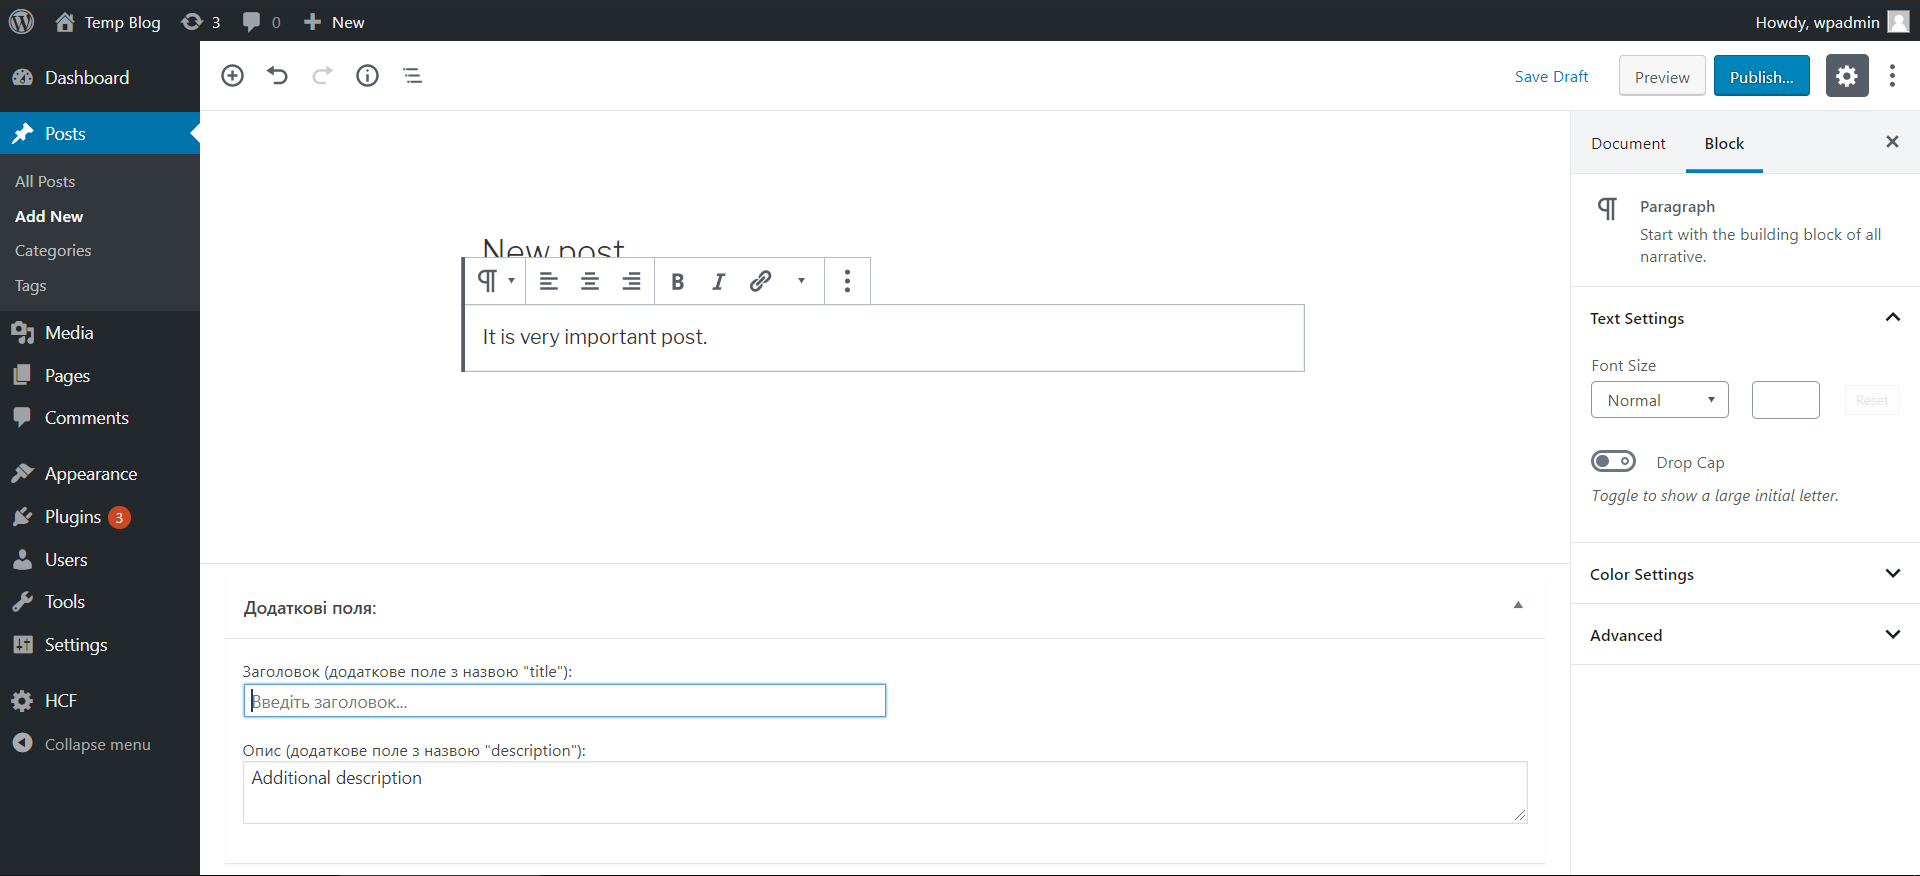 Post creation page with custom fields from HCF plugin